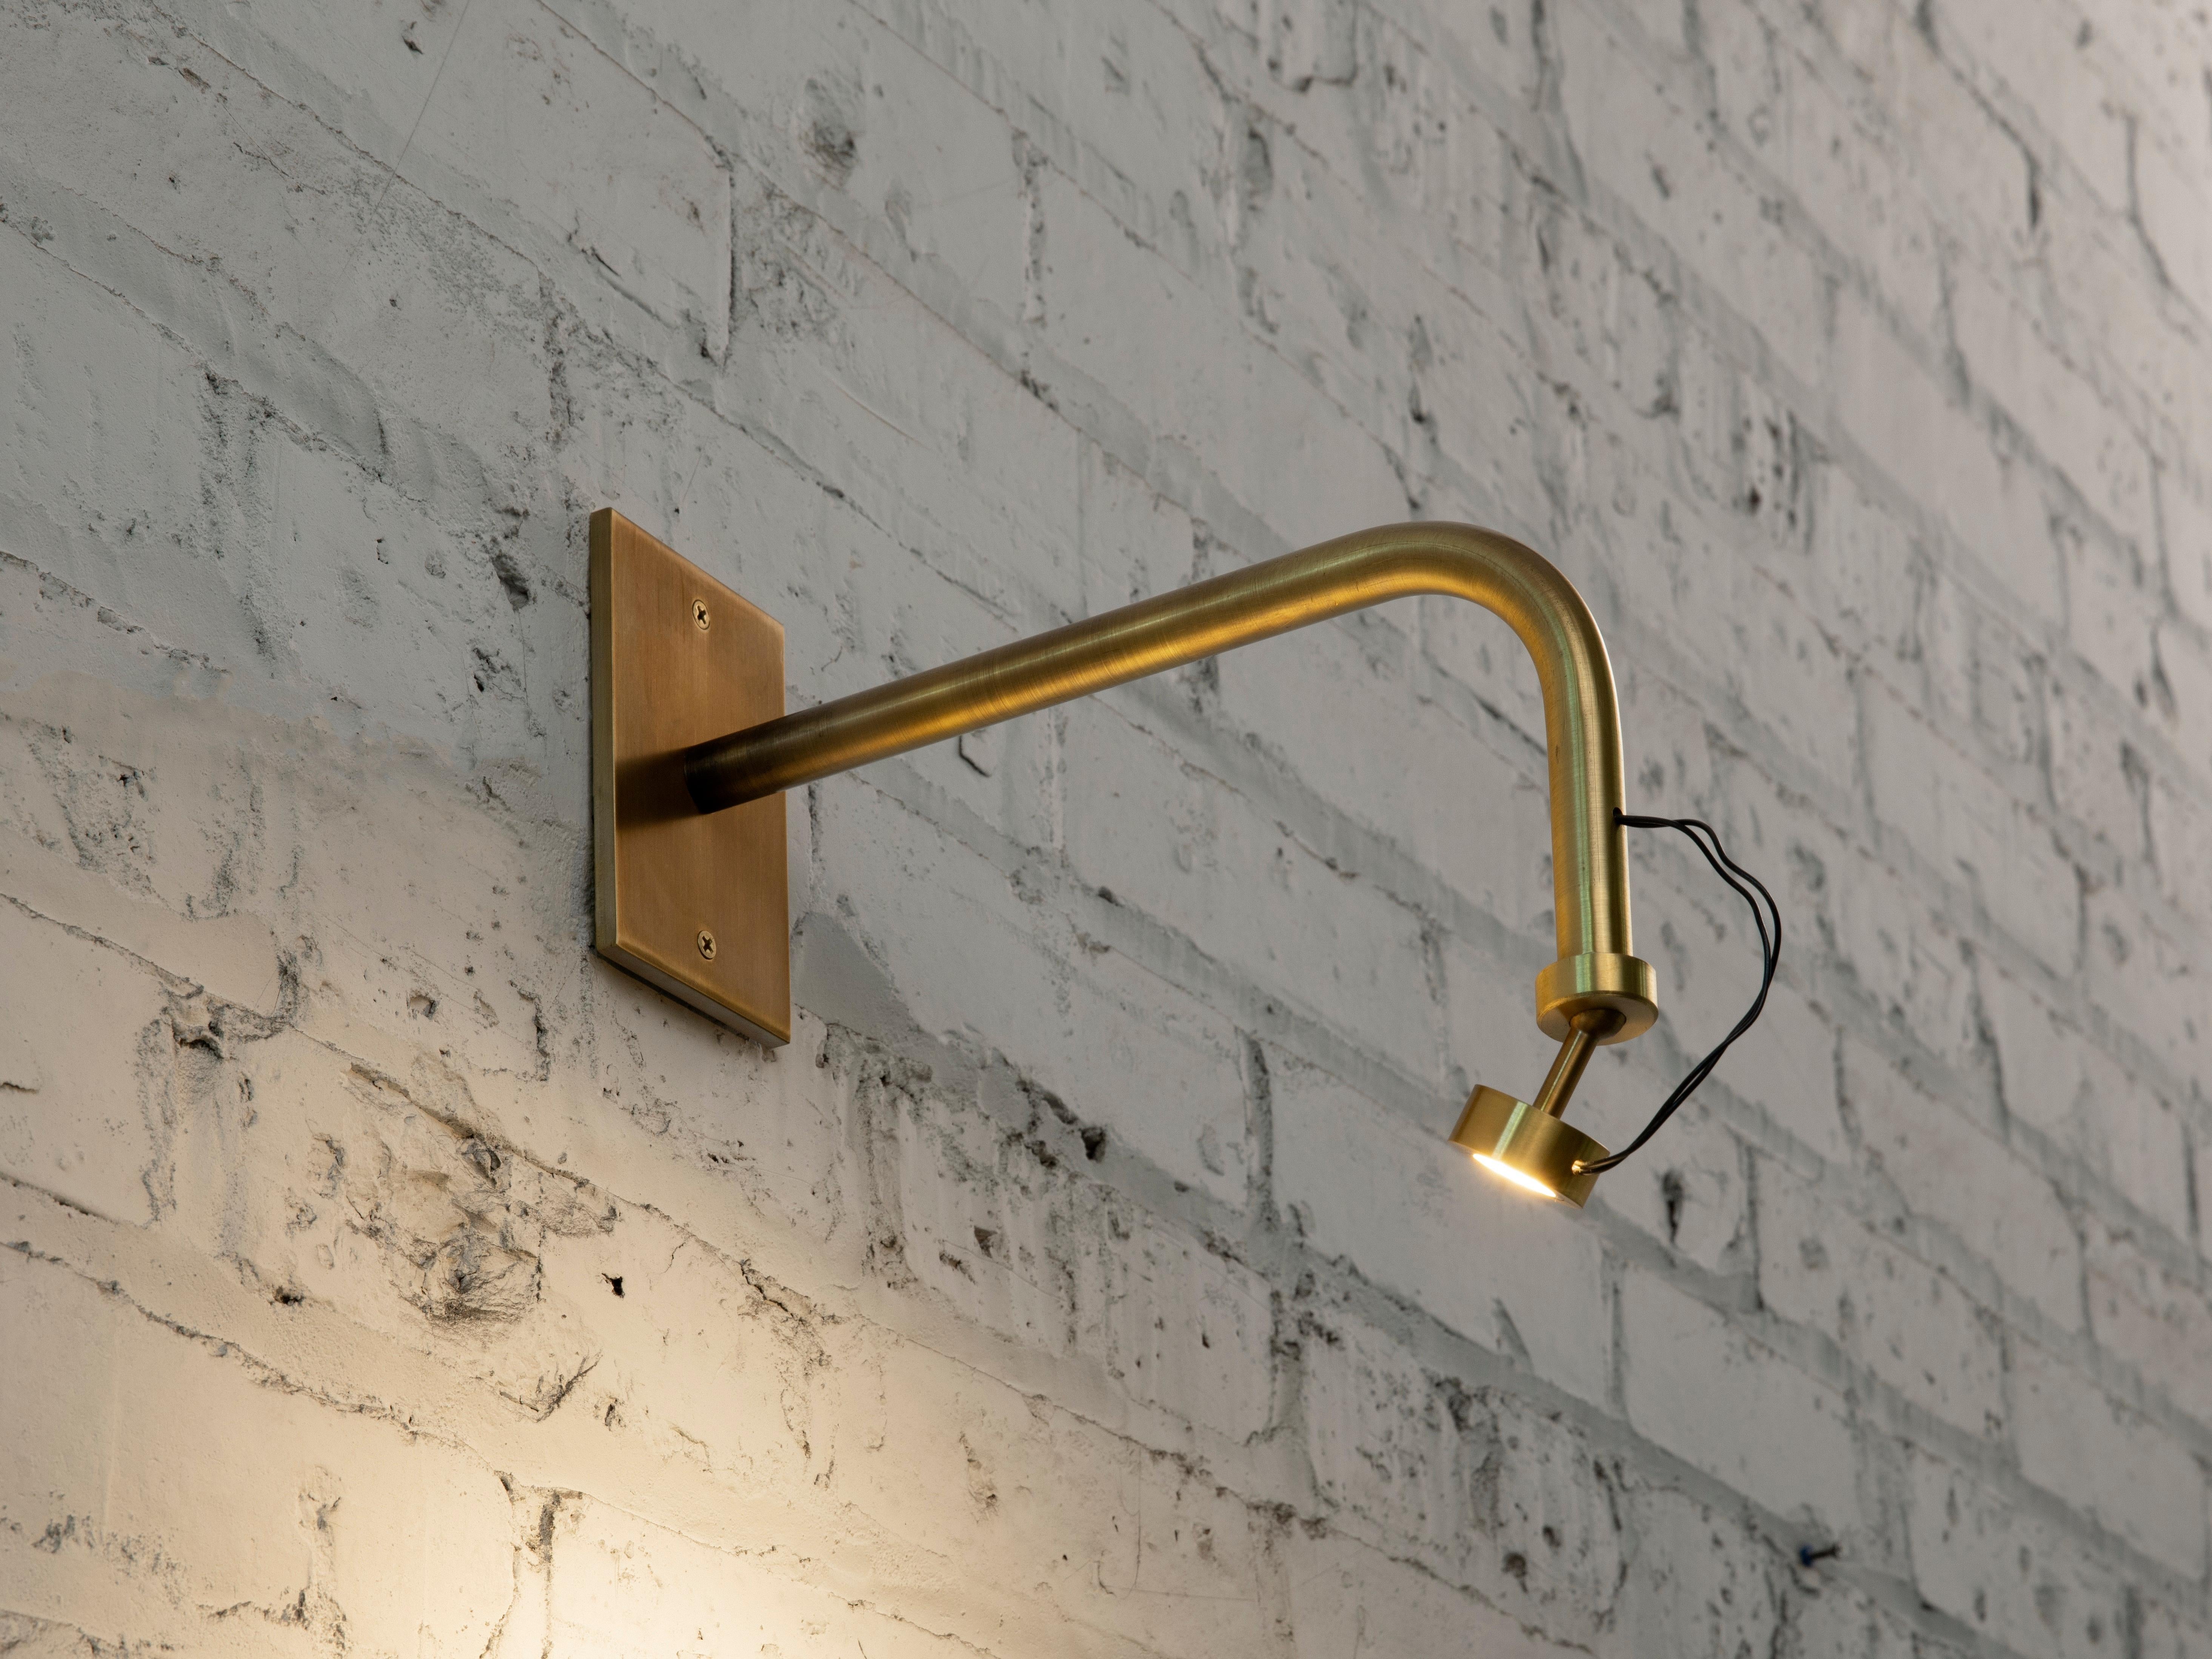 Art wall lamp by Gentner Design
Dimensions: D 7.6 x W 25.4 x H 22.8 cm
Materials: brass

All our lamps can be wired according to each country. If sold to the USA it will be wired for the USA for instance.

Gentner Design
Rooted in a language of